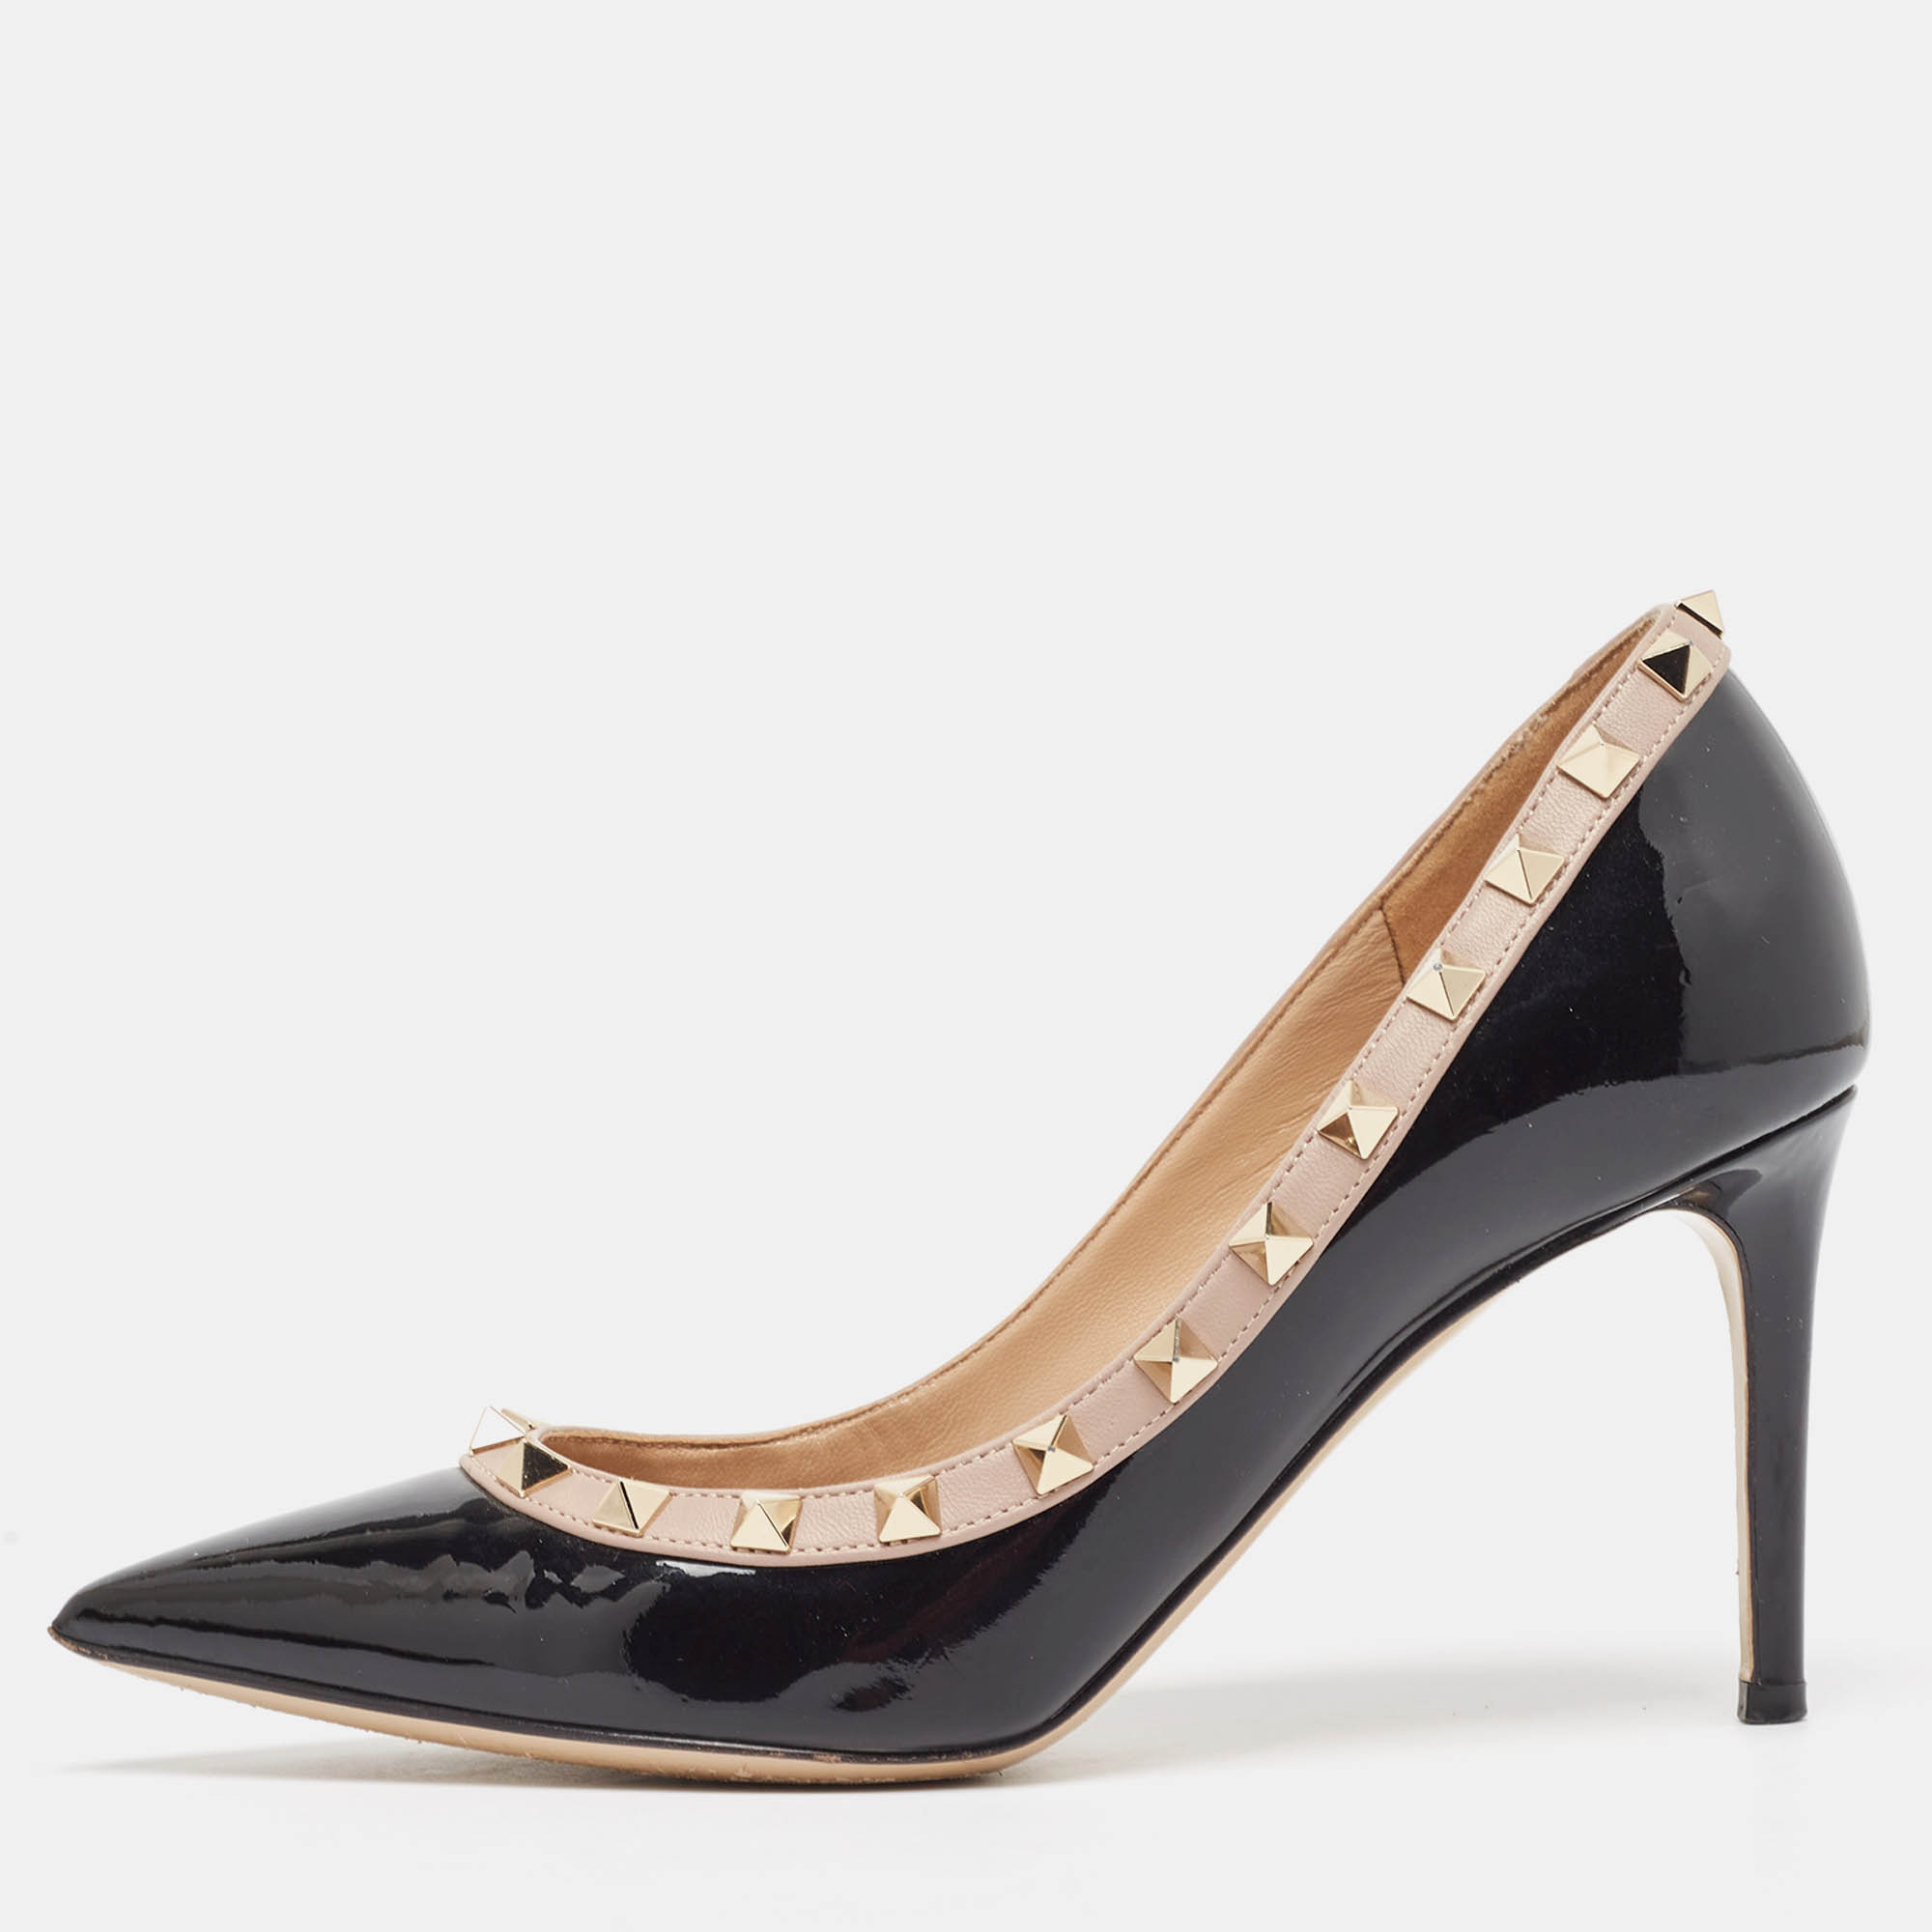 Valentino black leather and patent rockstud pumps size 37.5